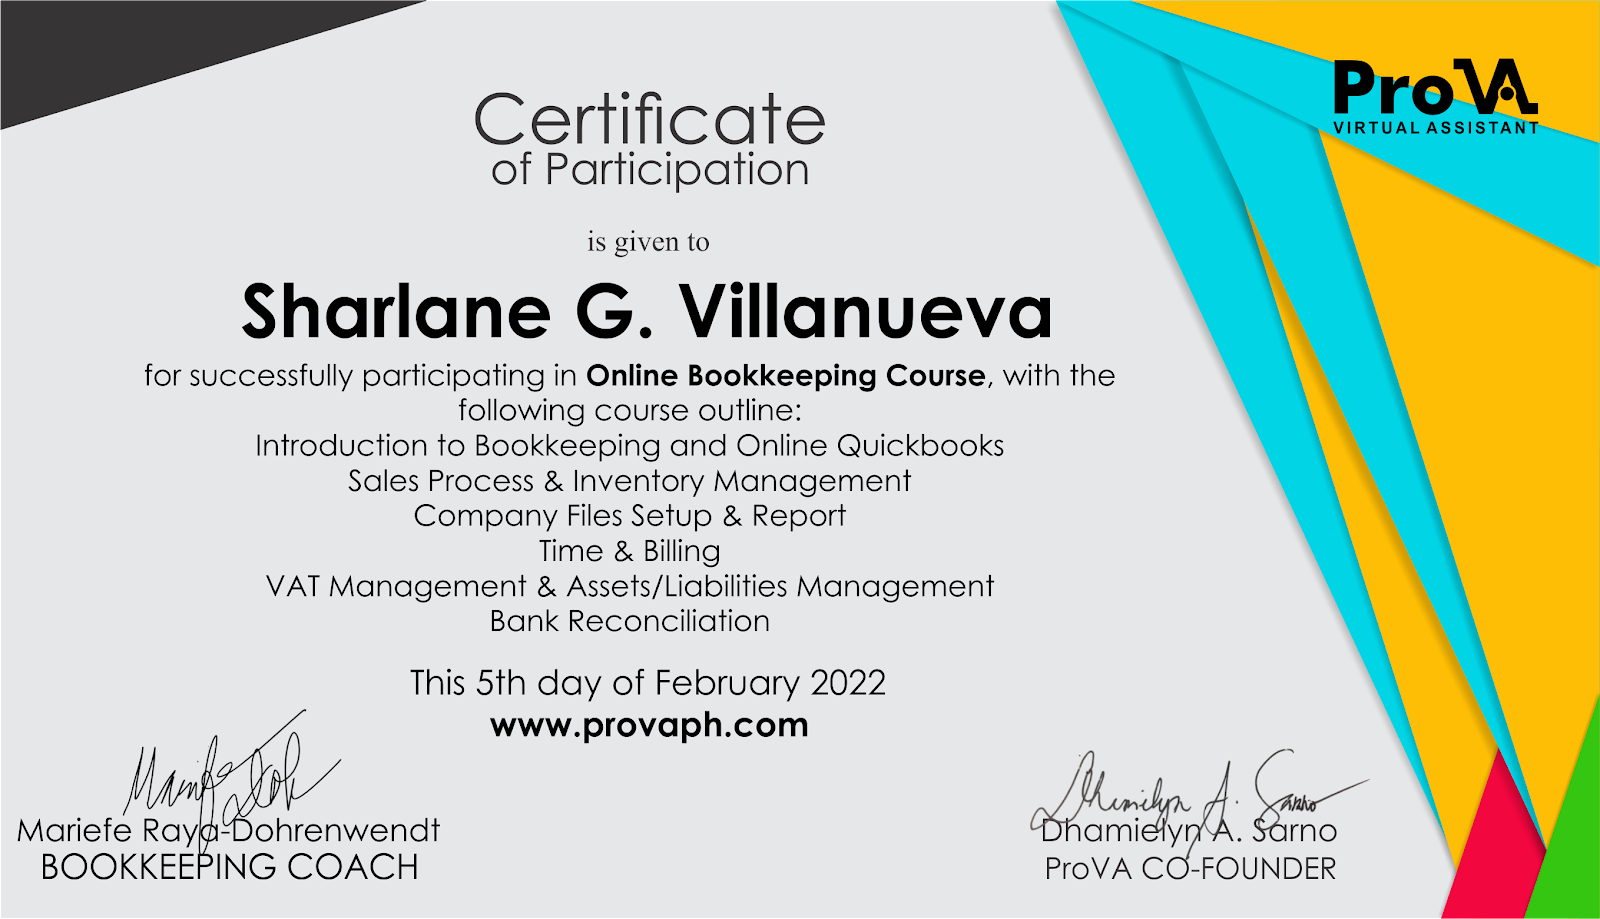 Online Bookkeeping Course Certificate